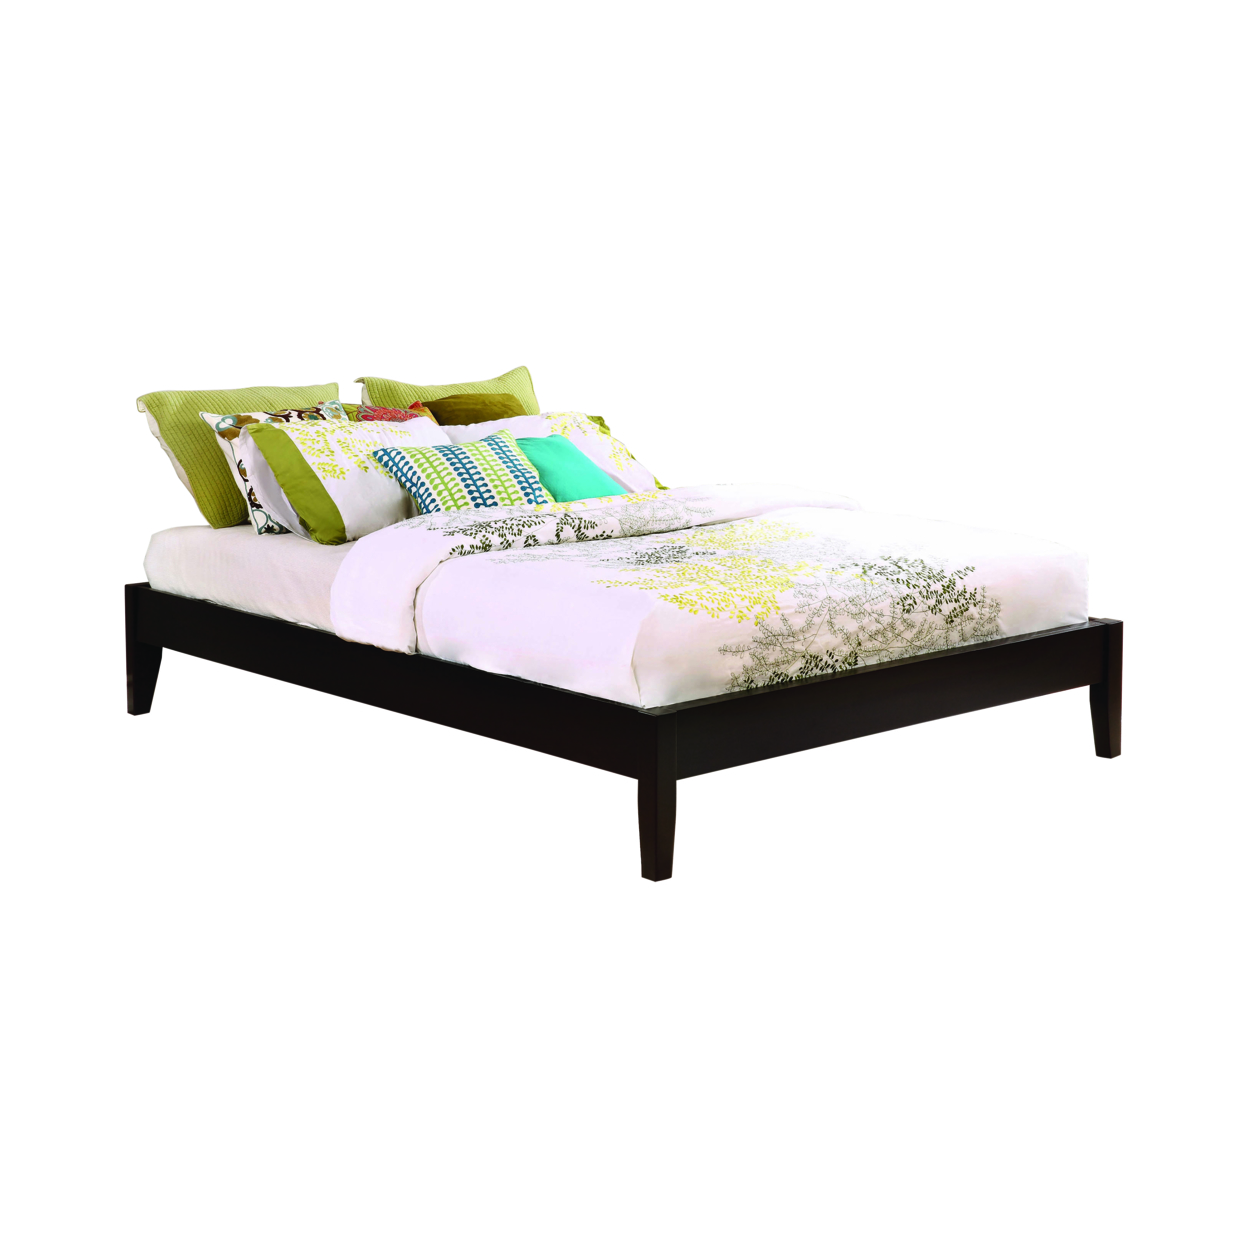 Wooden California King Size Universal Bed Frame With Tapered Legs, Brown- Saltoro Sherpi